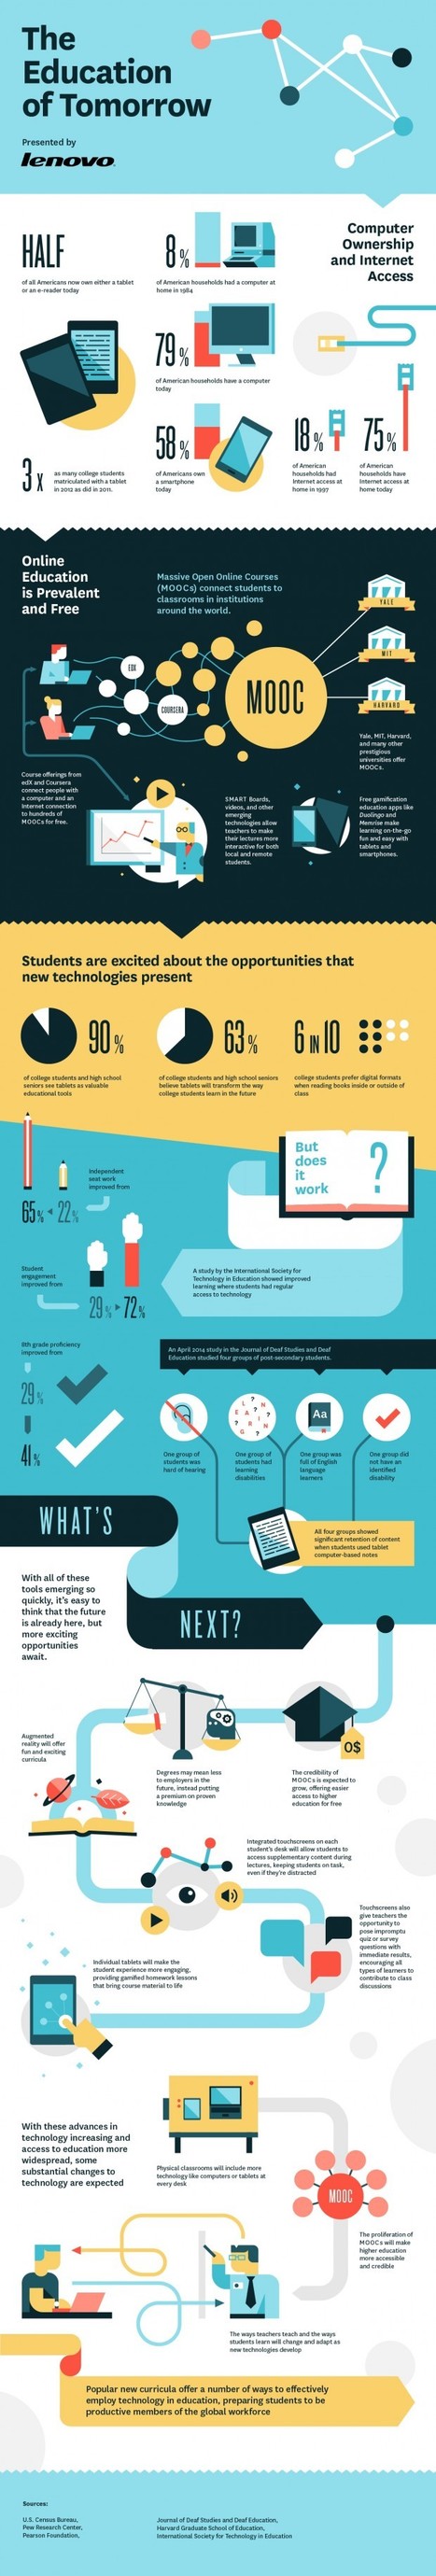 What Is The Future Of Education? [Infographic] | 21st Century Learning and Teaching | Scoop.it